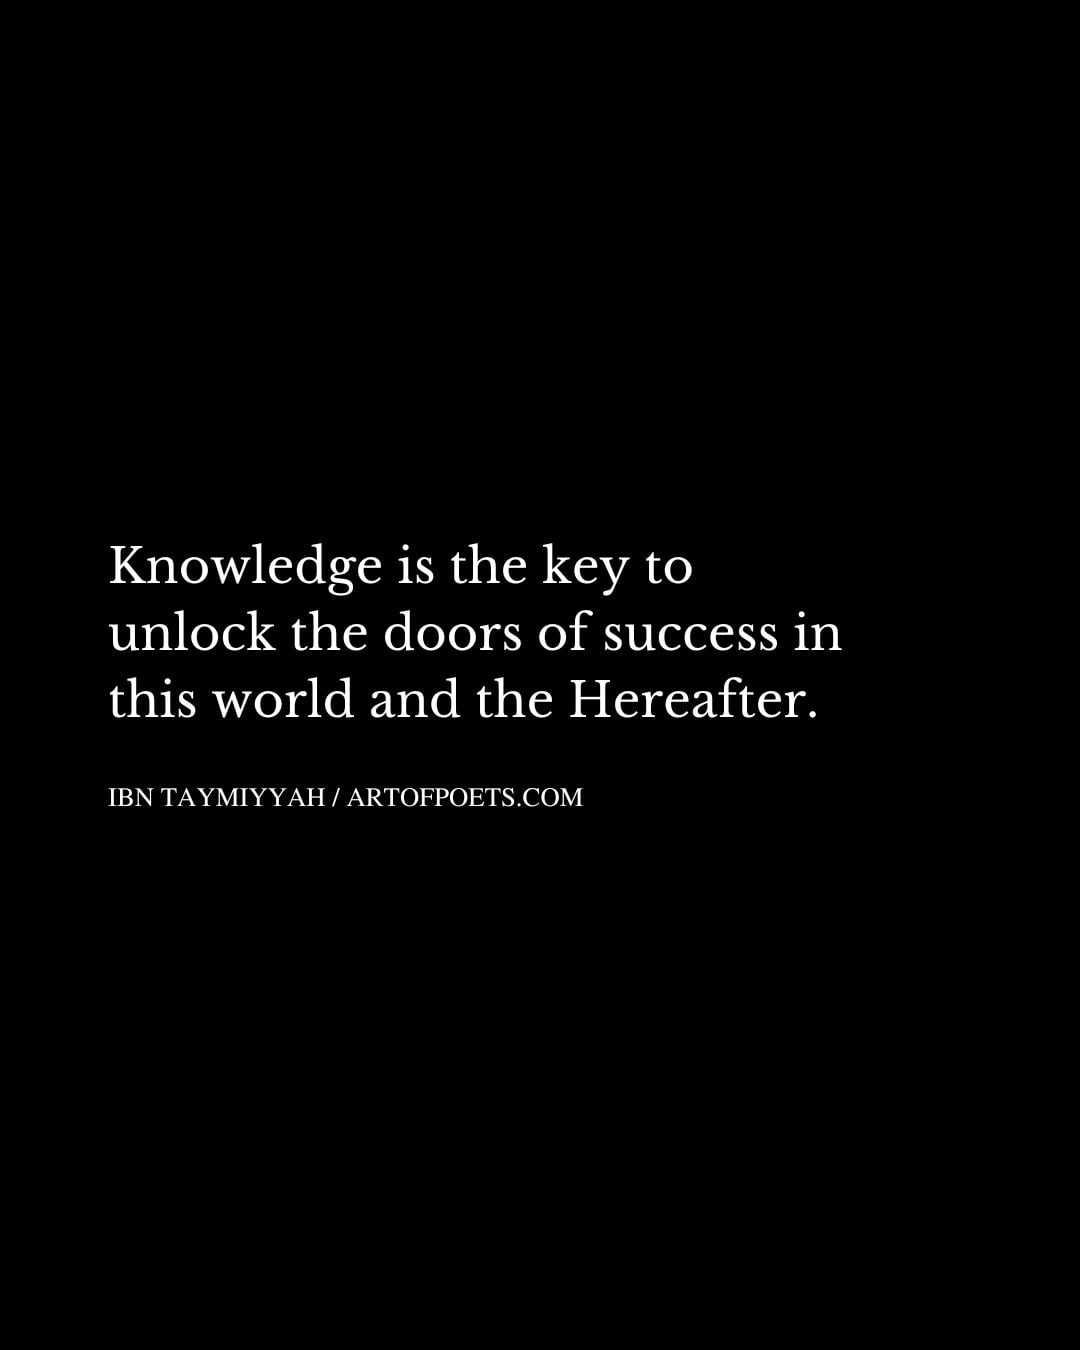 Knowledge is the key to unlock the doors of success in this world and the Hereafter